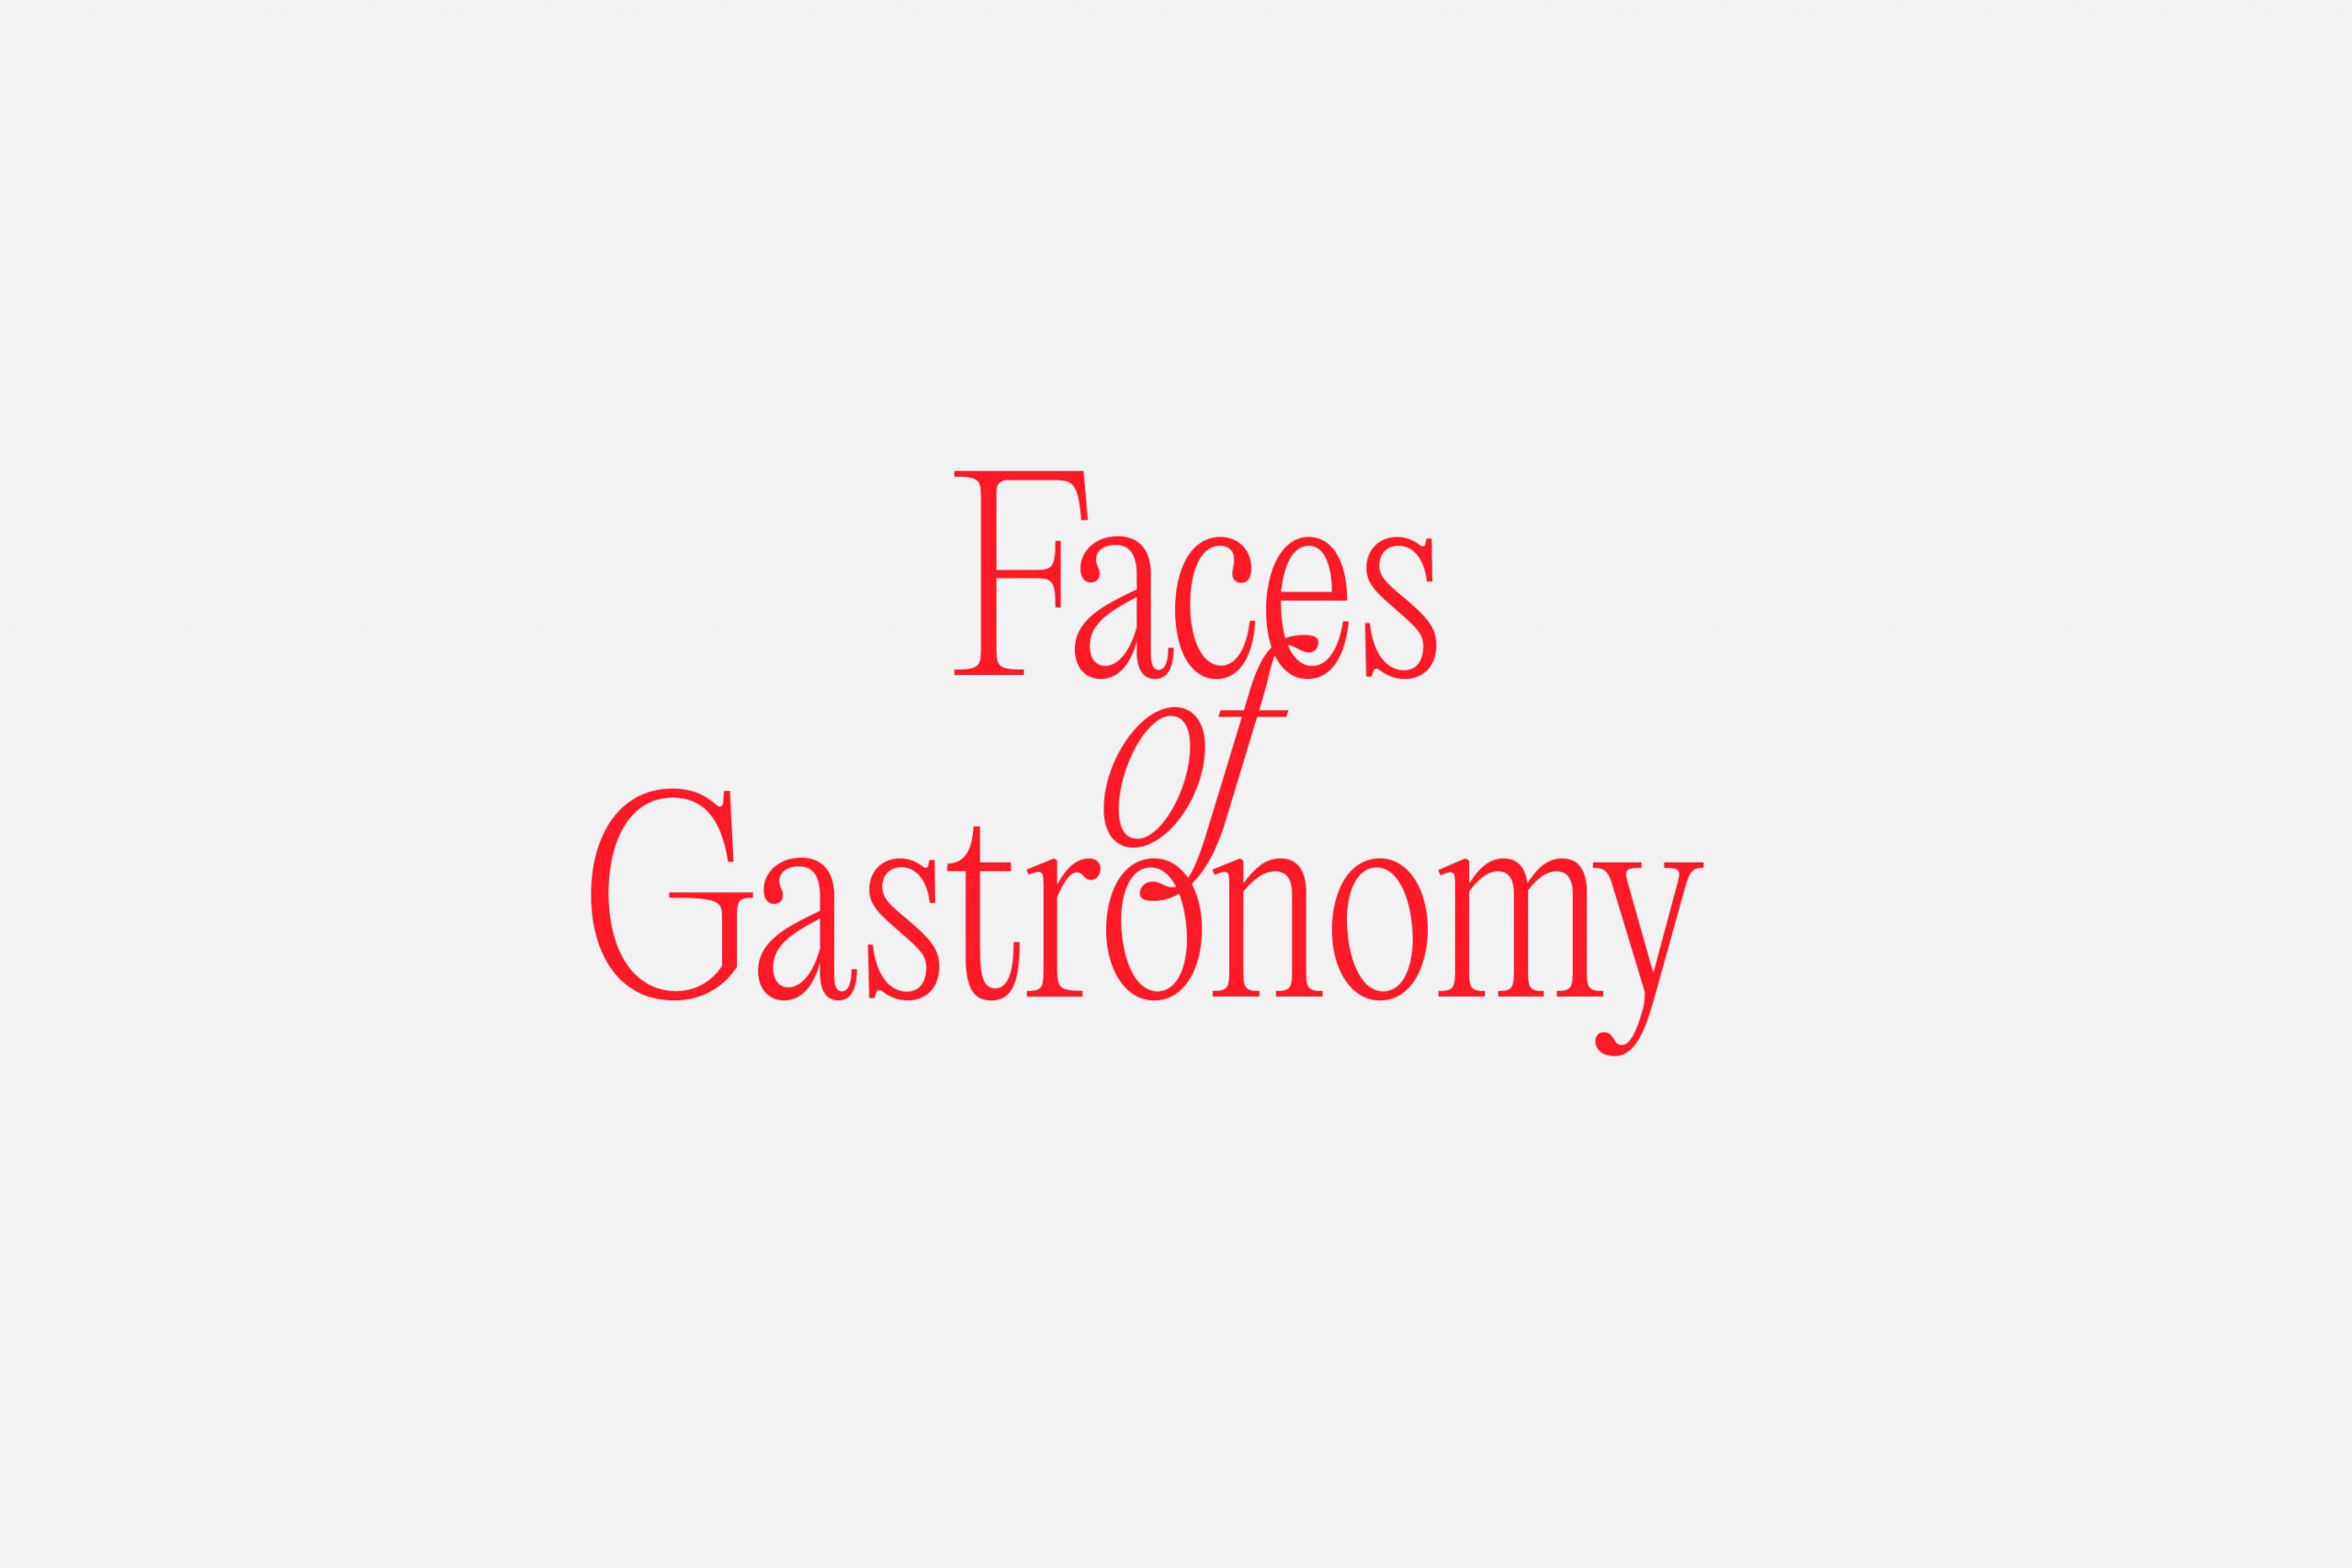 Faces of Gastronomy